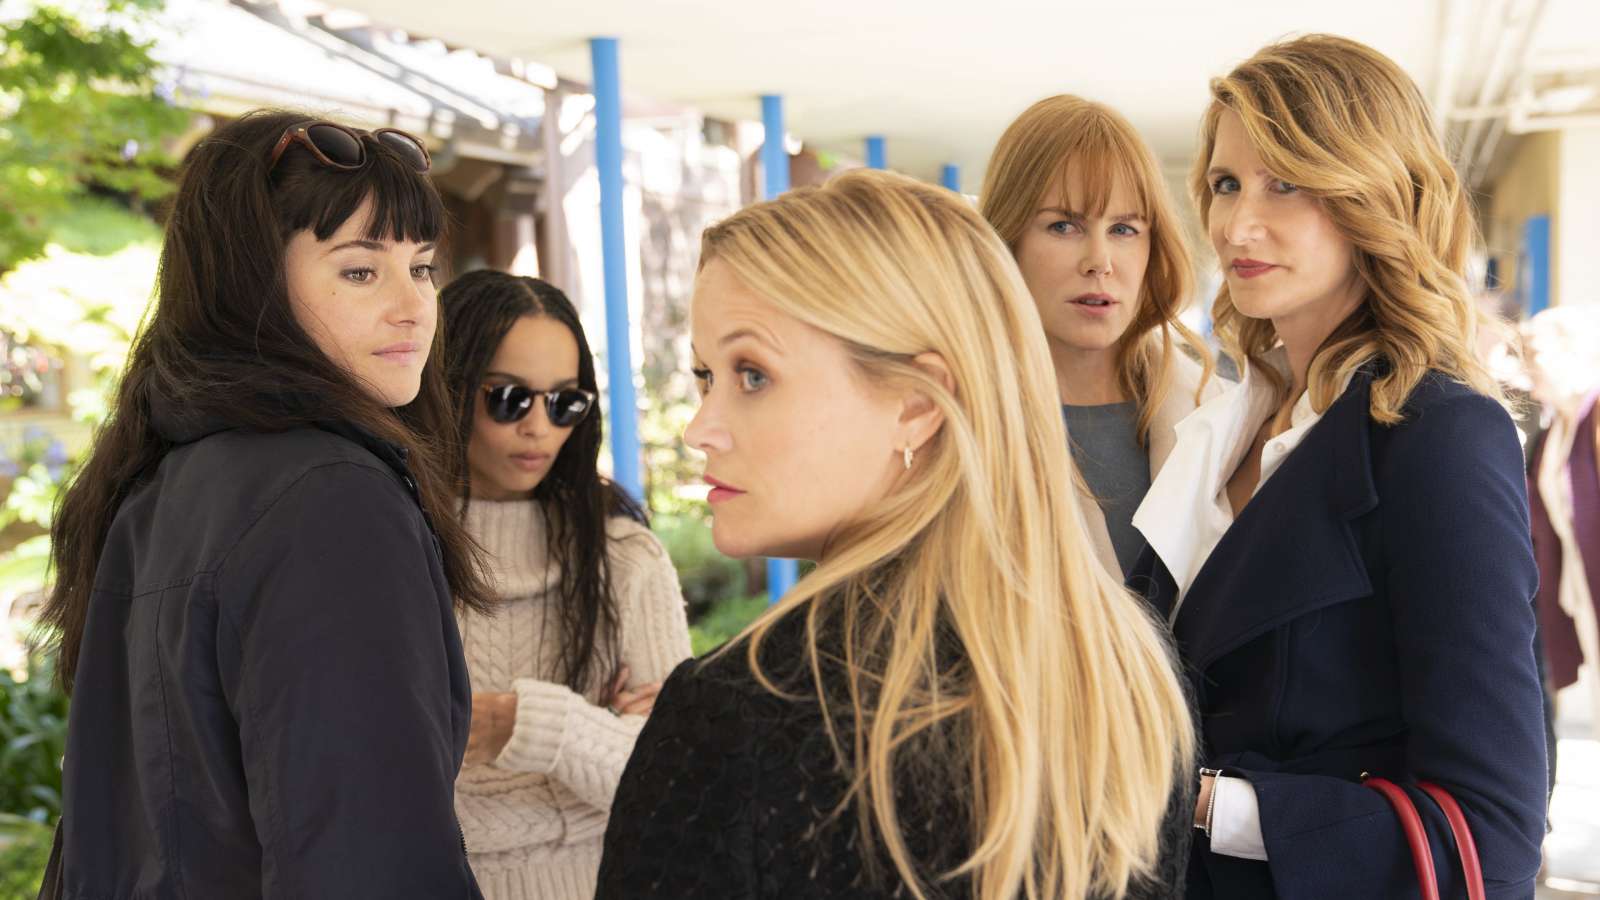 Big Little Lies : What Have They Done?